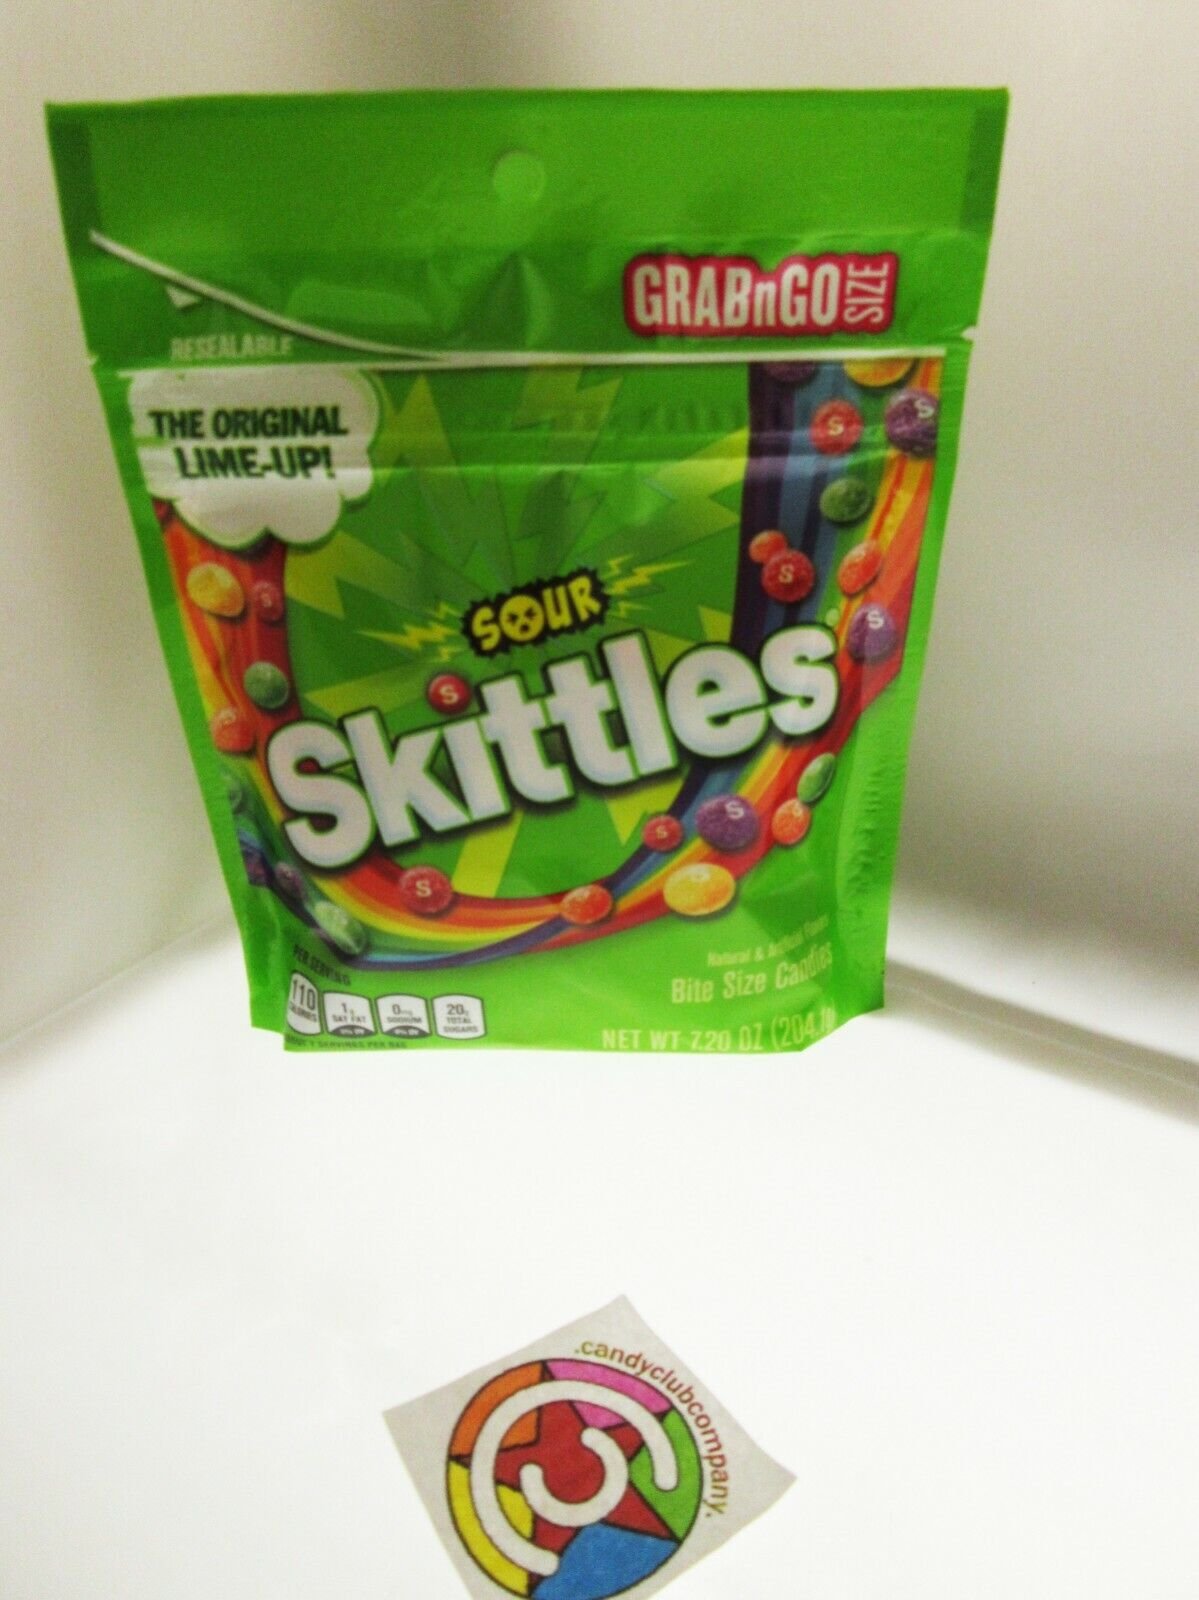 Sour Skittles®  Chewy Candy American Candies 7.2oz Resealable Bag w/ Lime